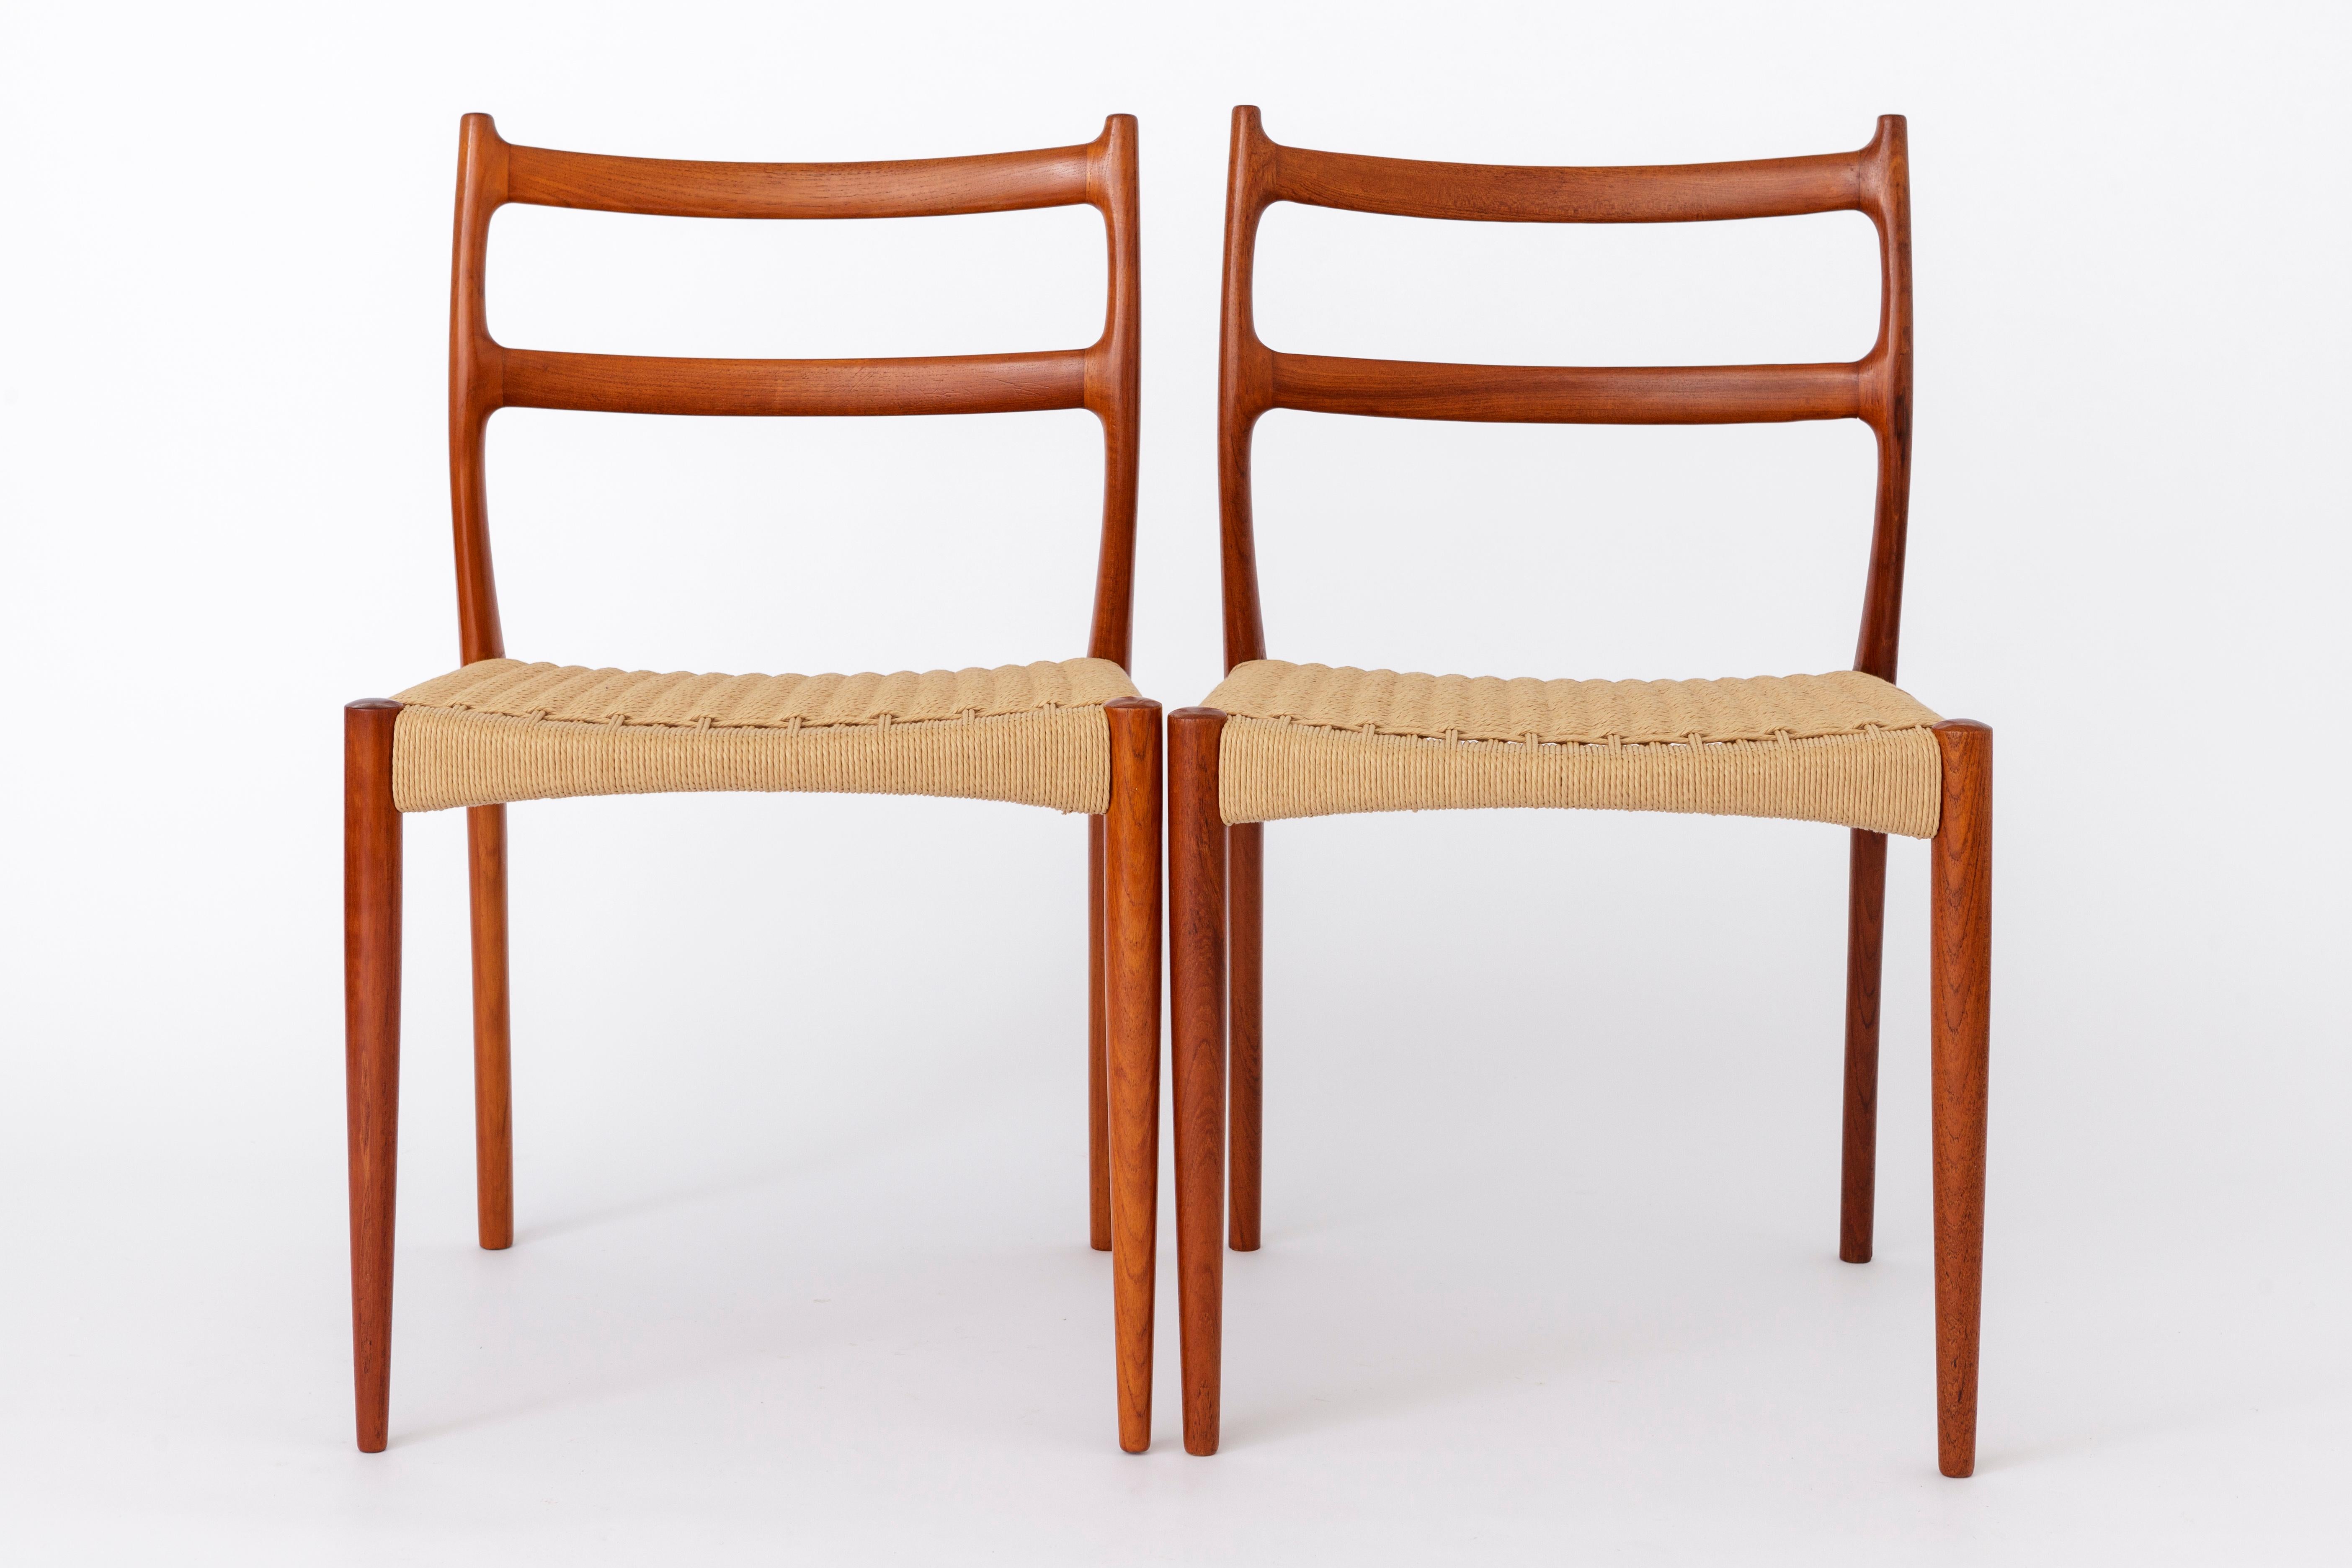 Unique set of vintage dining chairs. 
Design by Søren Ladefoged for manufacturer SL Møbler, Denmark. 
Production period: 1960s. 
Displayed price is for a pair. 

Very good condition. 
The chairs are from different sets. Slightly color difference.